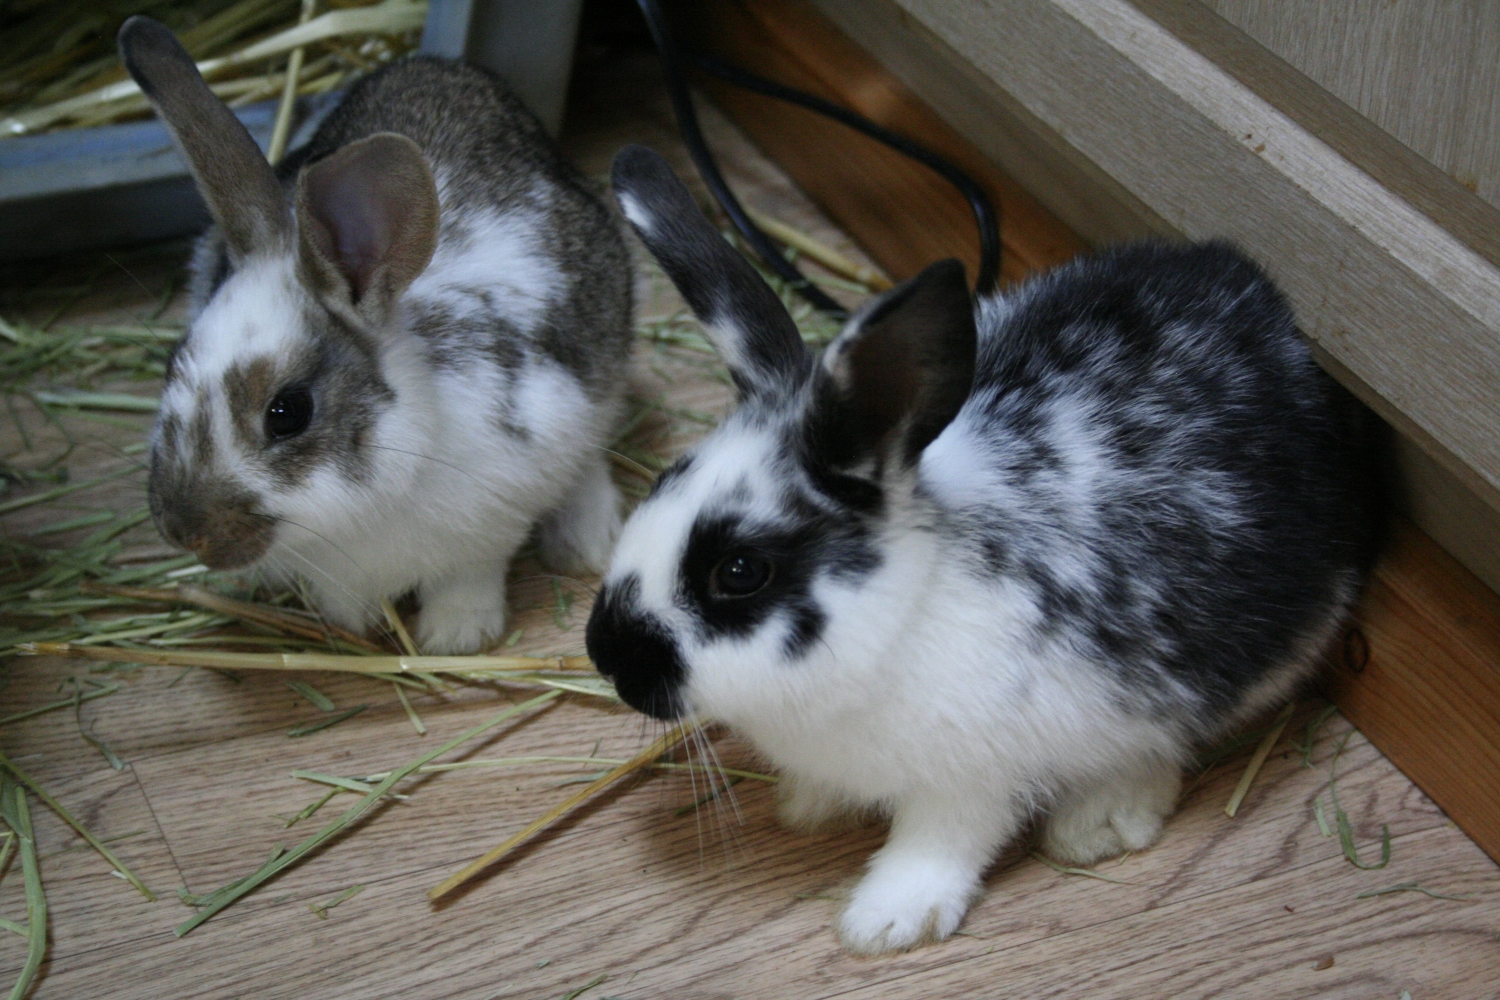 Bunny and Clyde